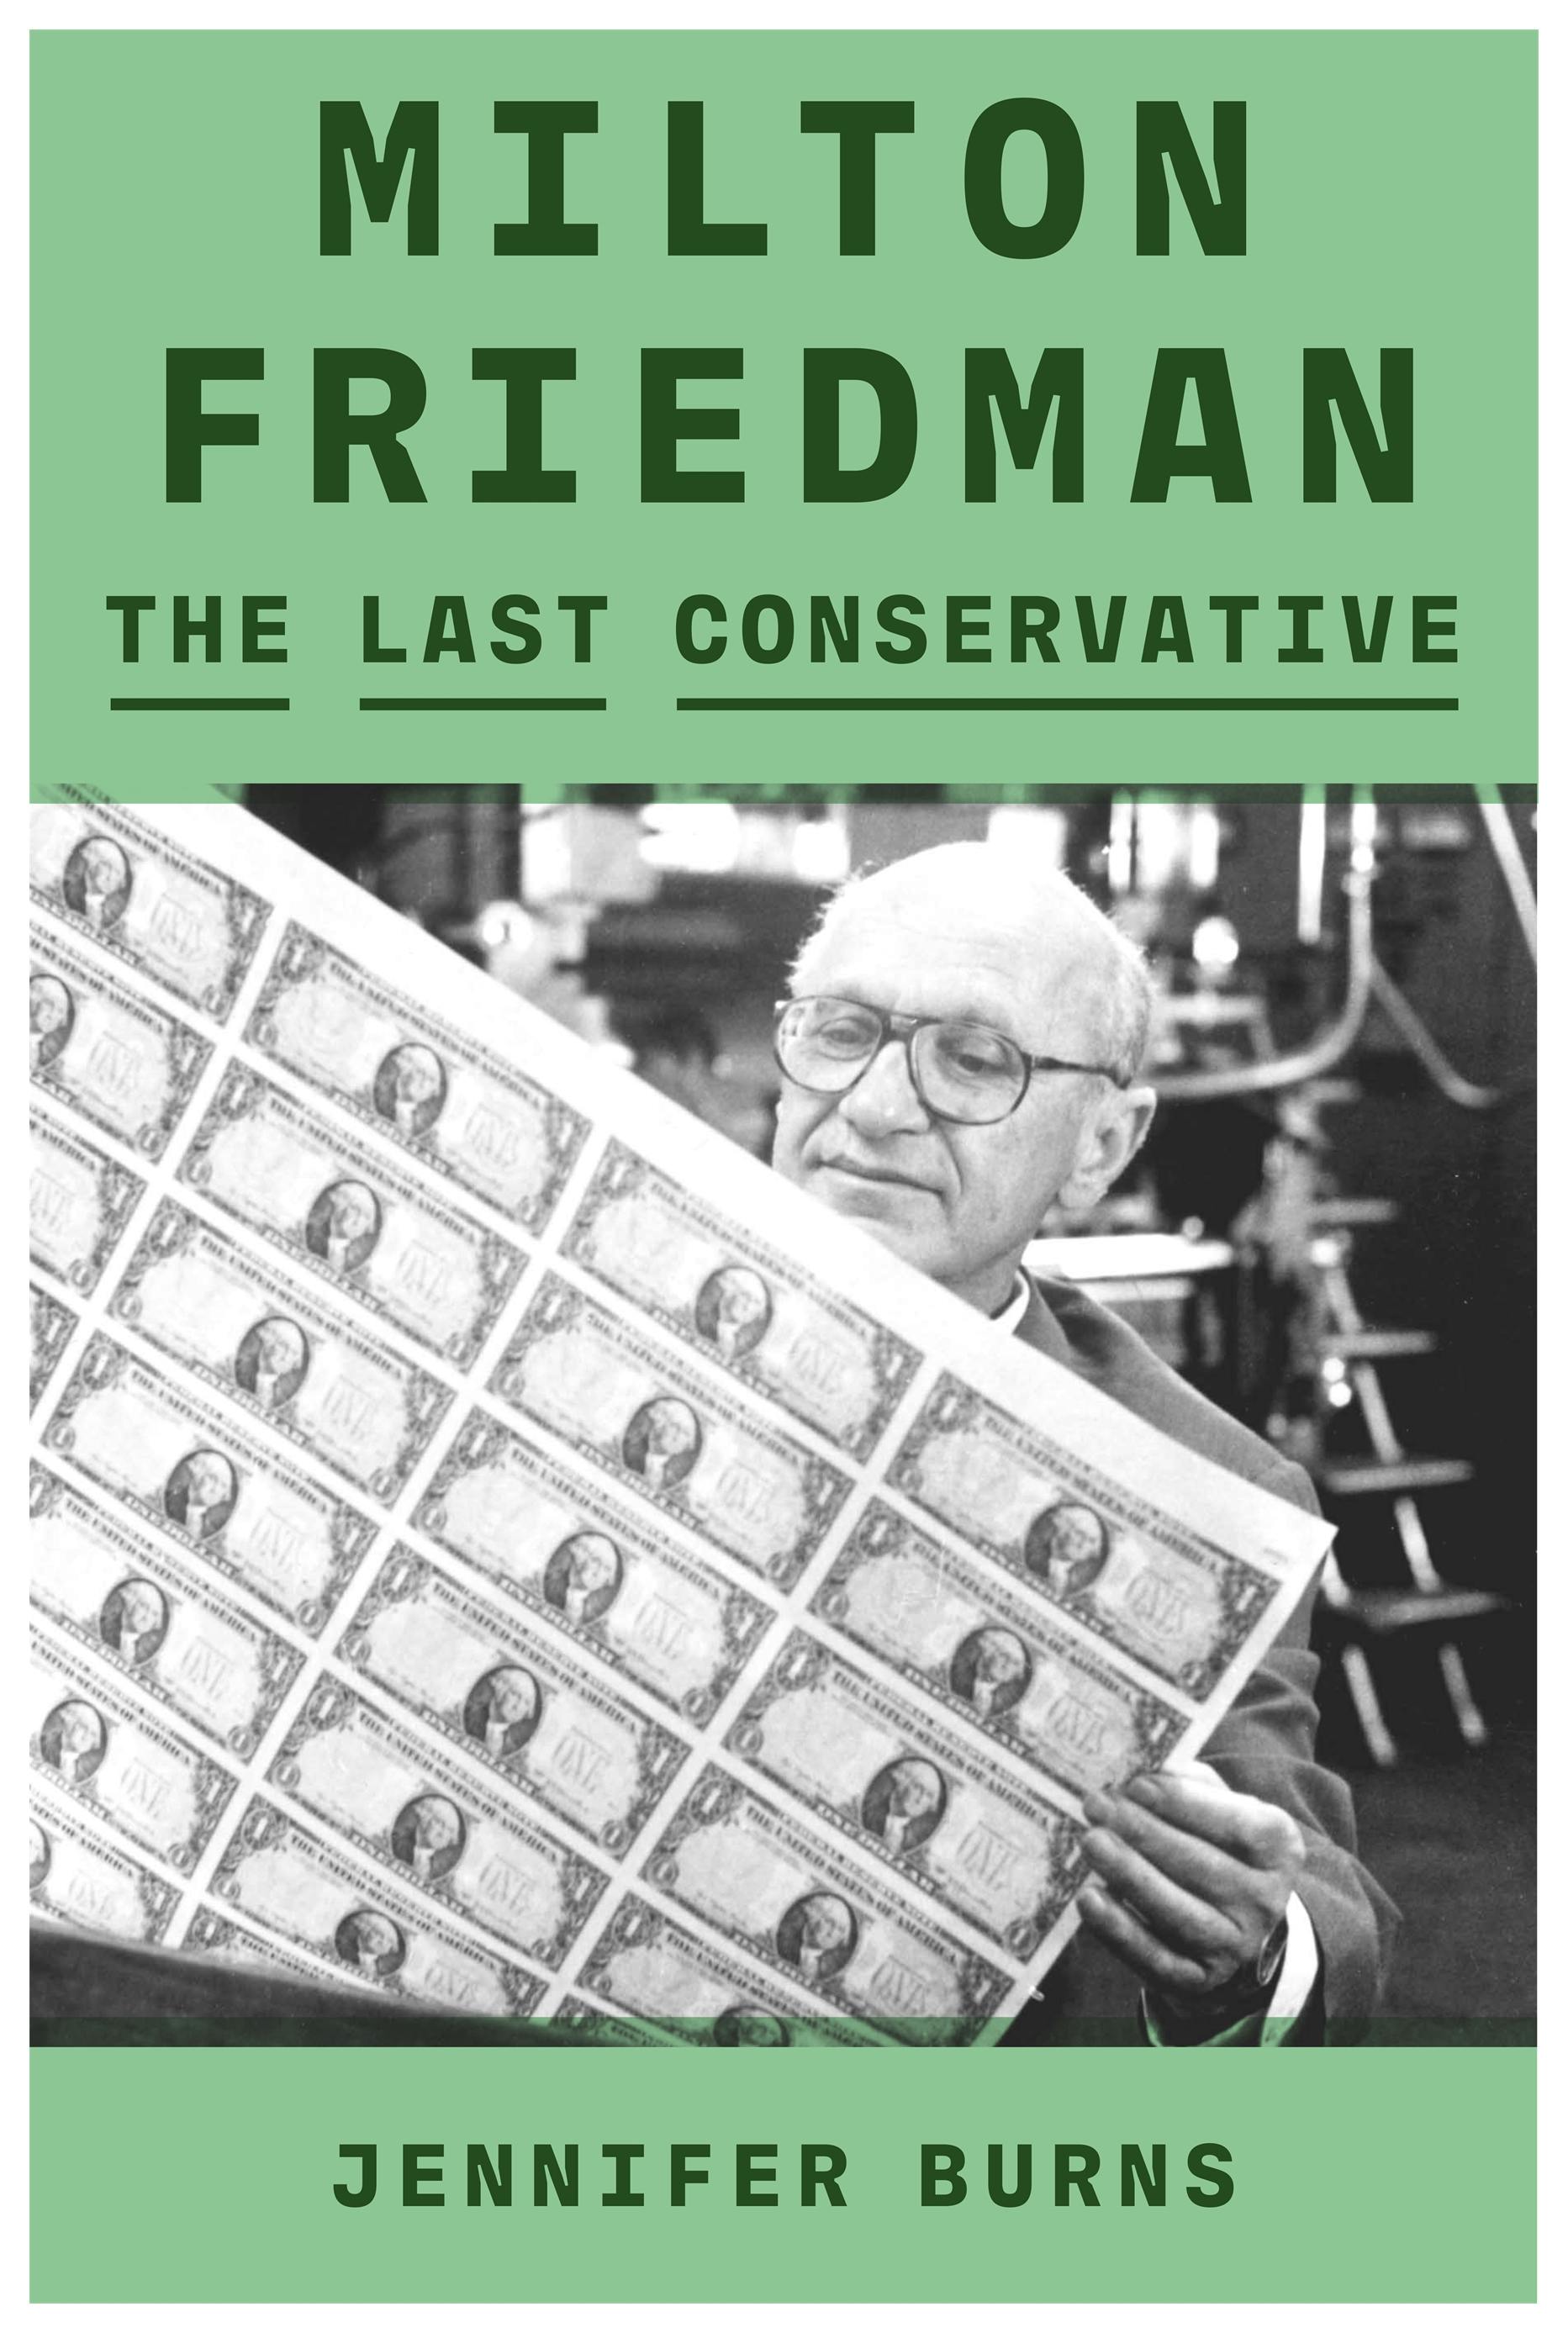 The End of Milton Friedman’s Reign | The New Republic